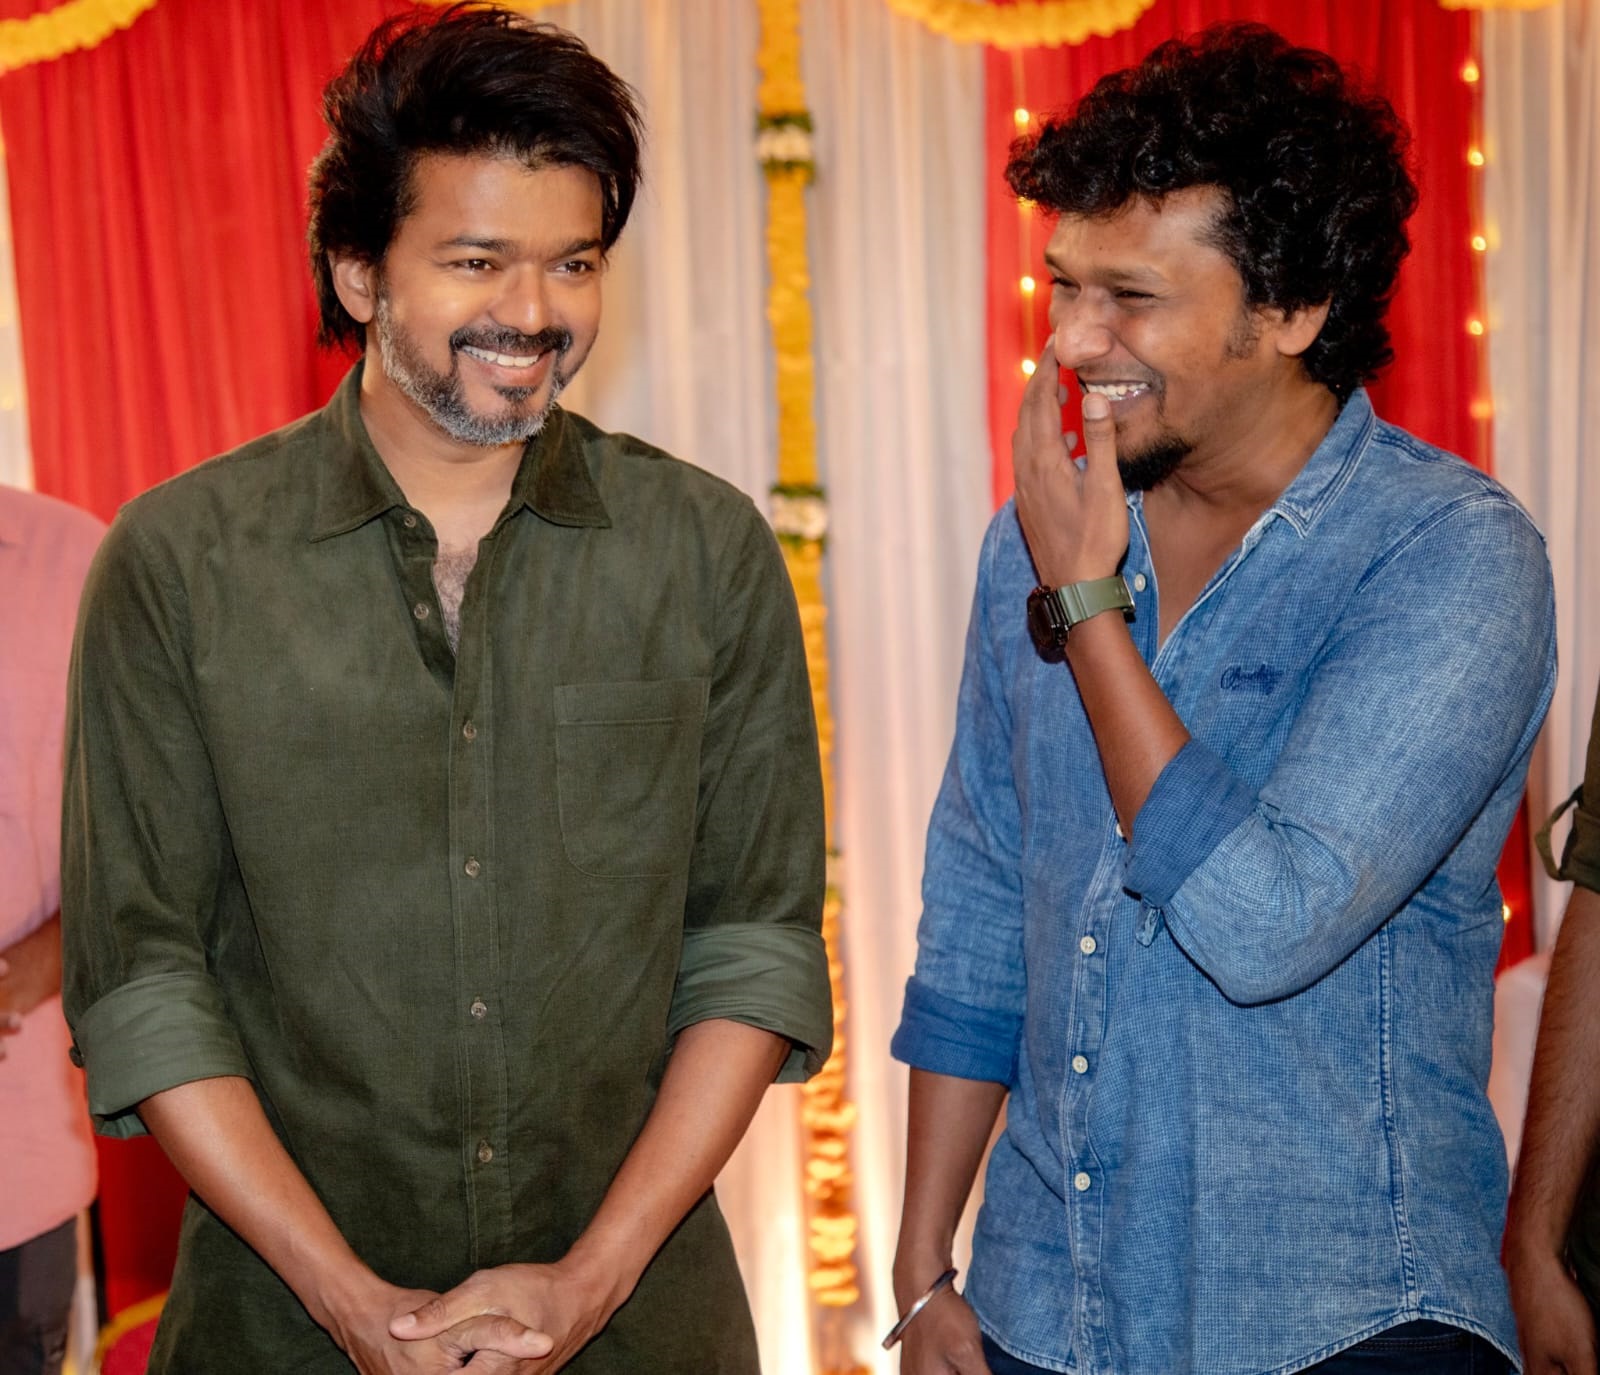 Candid clicks from the Grand Pooja Ceremony of Thalapathy67